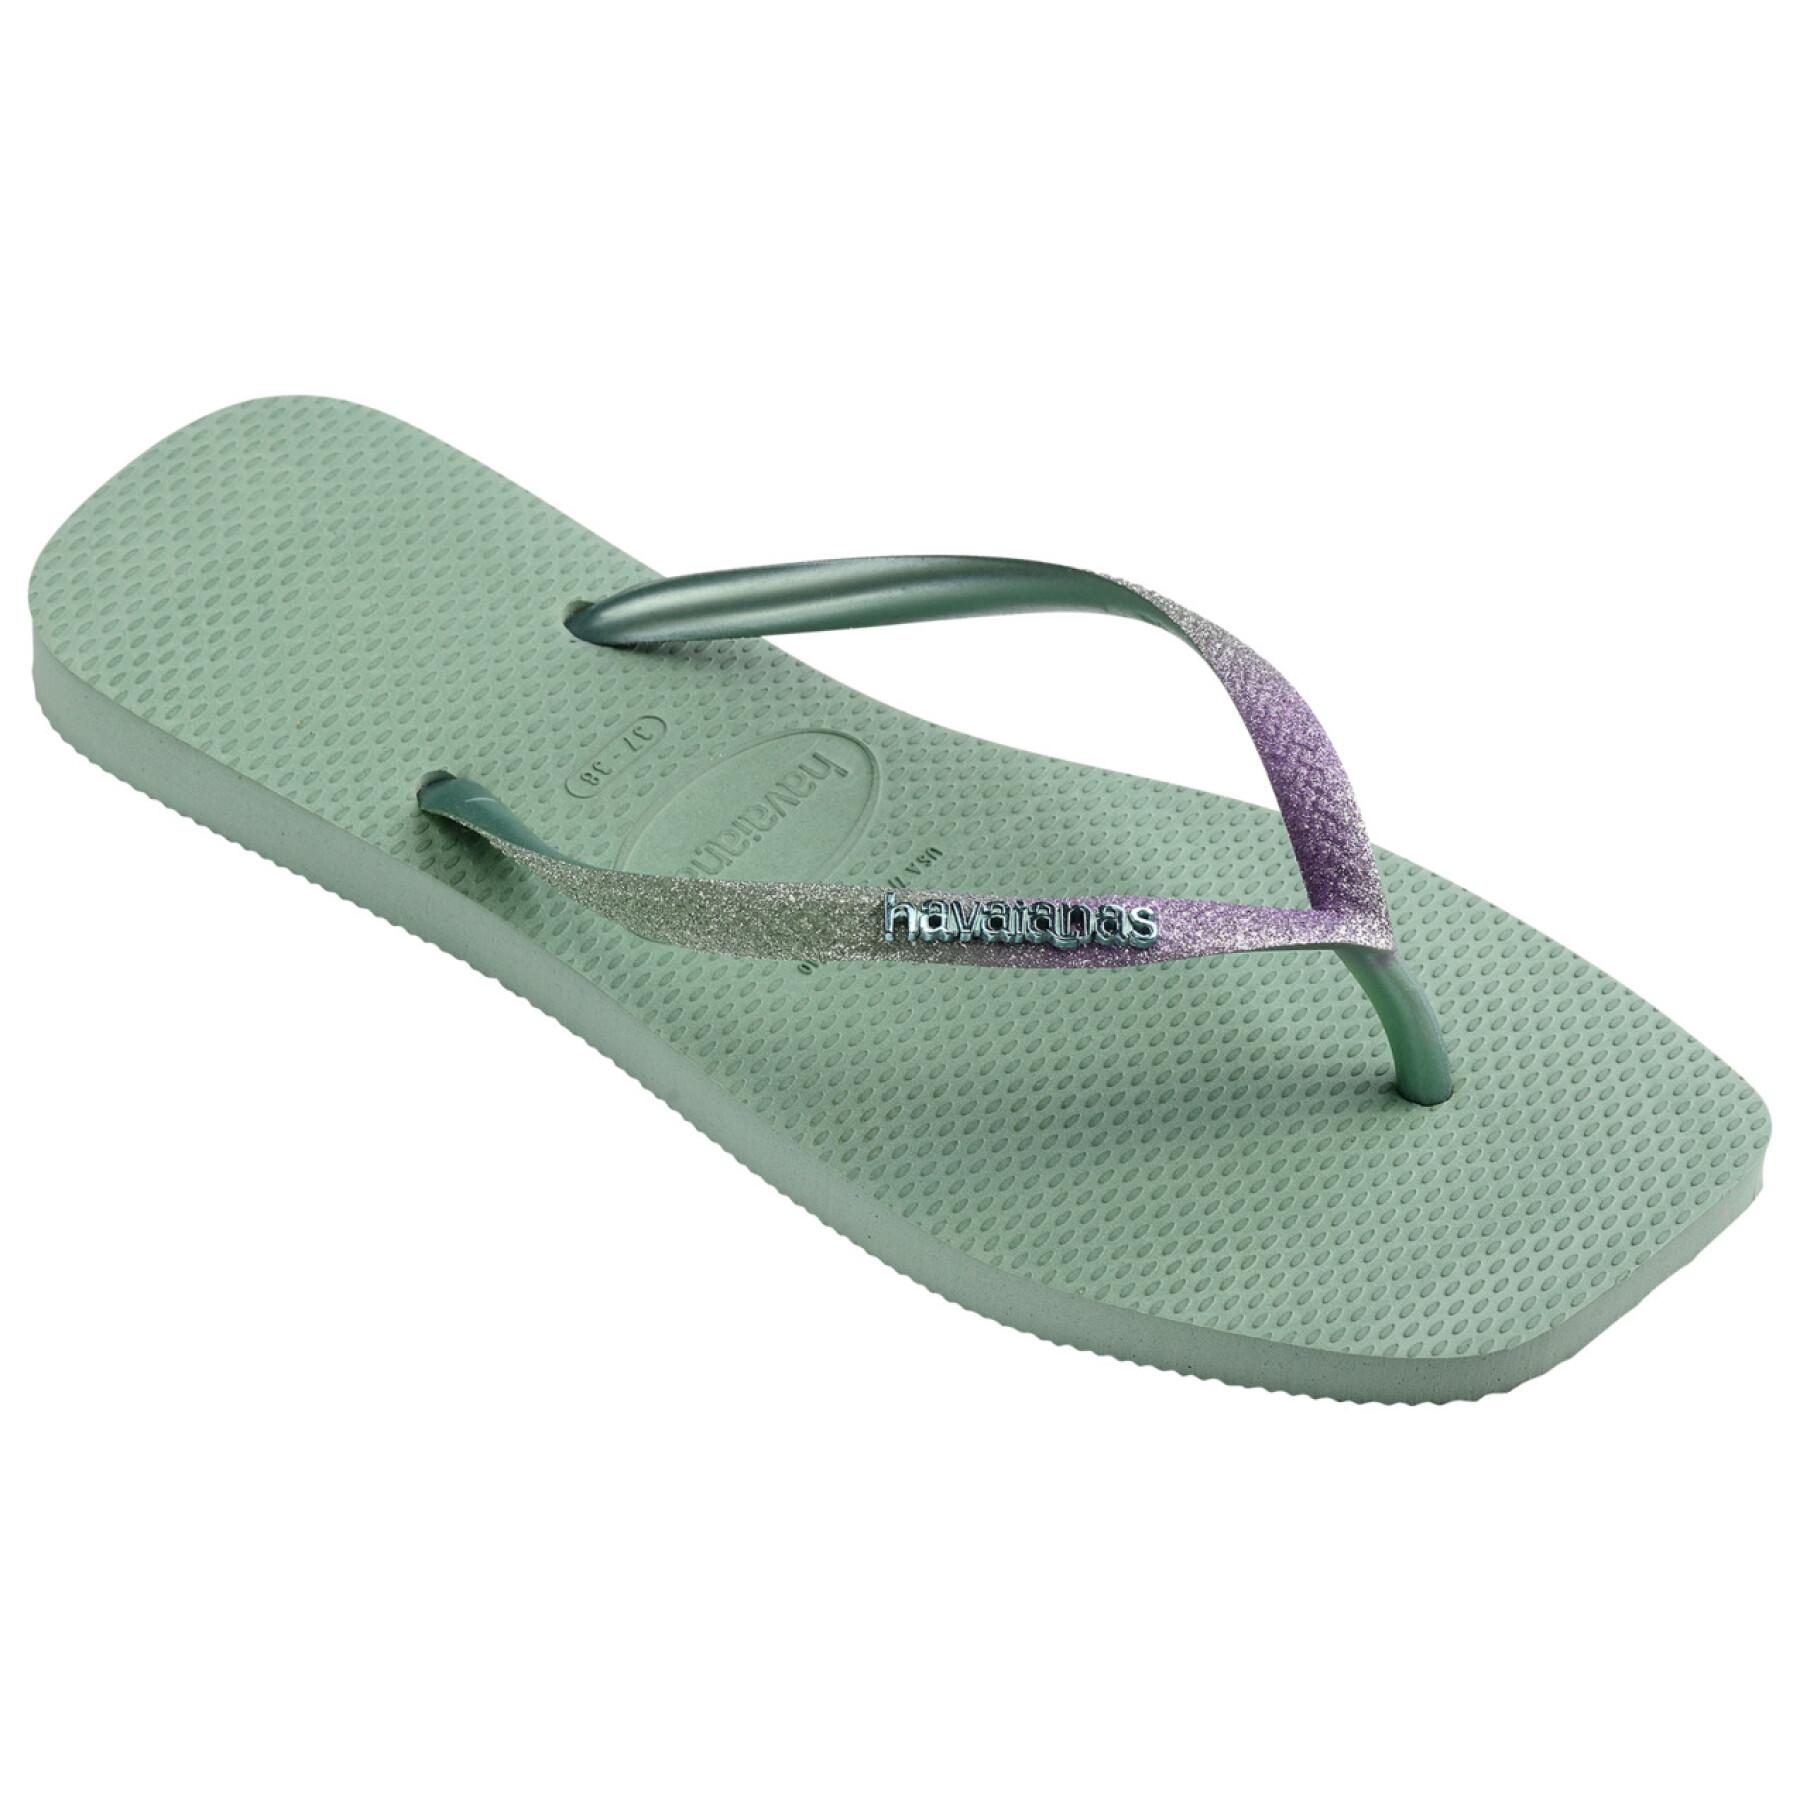 Vrouwenslippers Havaianas Square Glitter